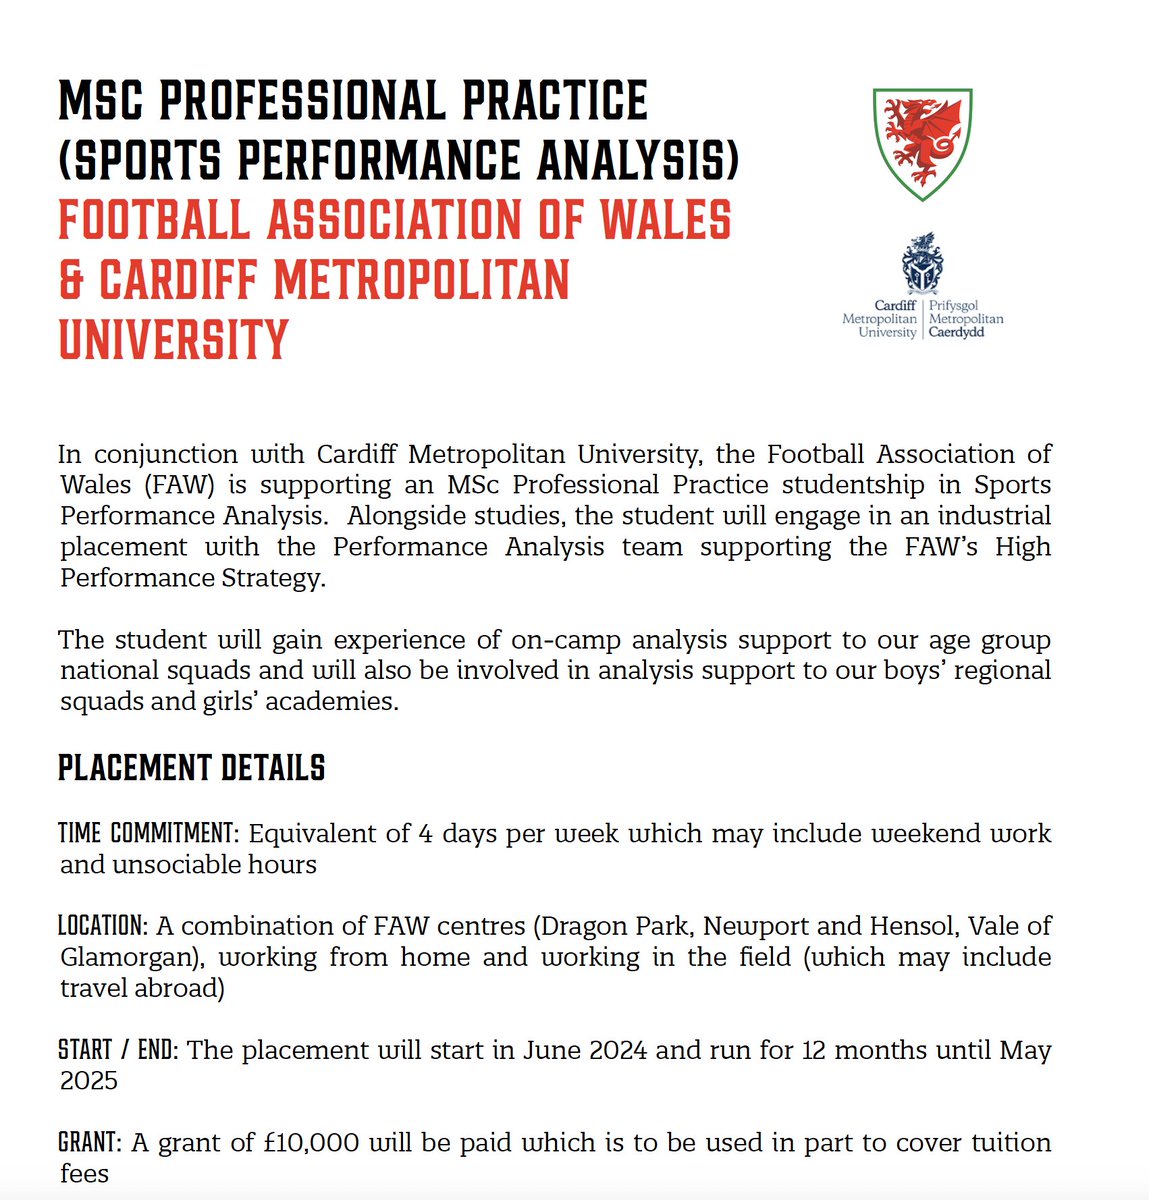 Please find great studentship opportunity working with the FAW as a performance analyst whilst doing an MSc SPA degree at Cardiff Met. University . To apply please follow the link forms.gle/rNmY7R4Ldkv9B5…